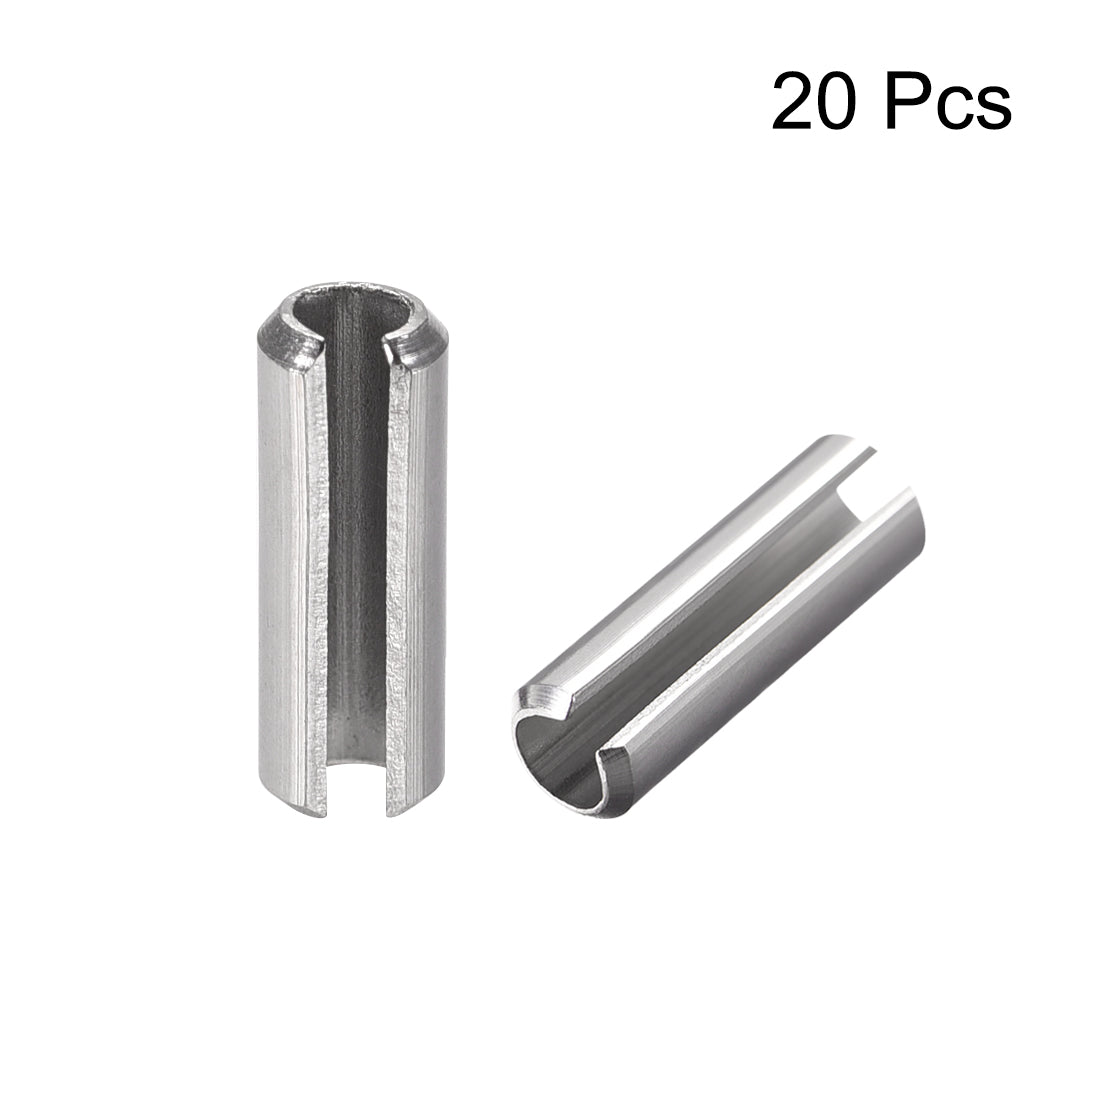 Uxcell Uxcell M5 x 12mm 304 Stainless Steel Split Spring Roll Dowel Pins Plain Finish 20Pcs